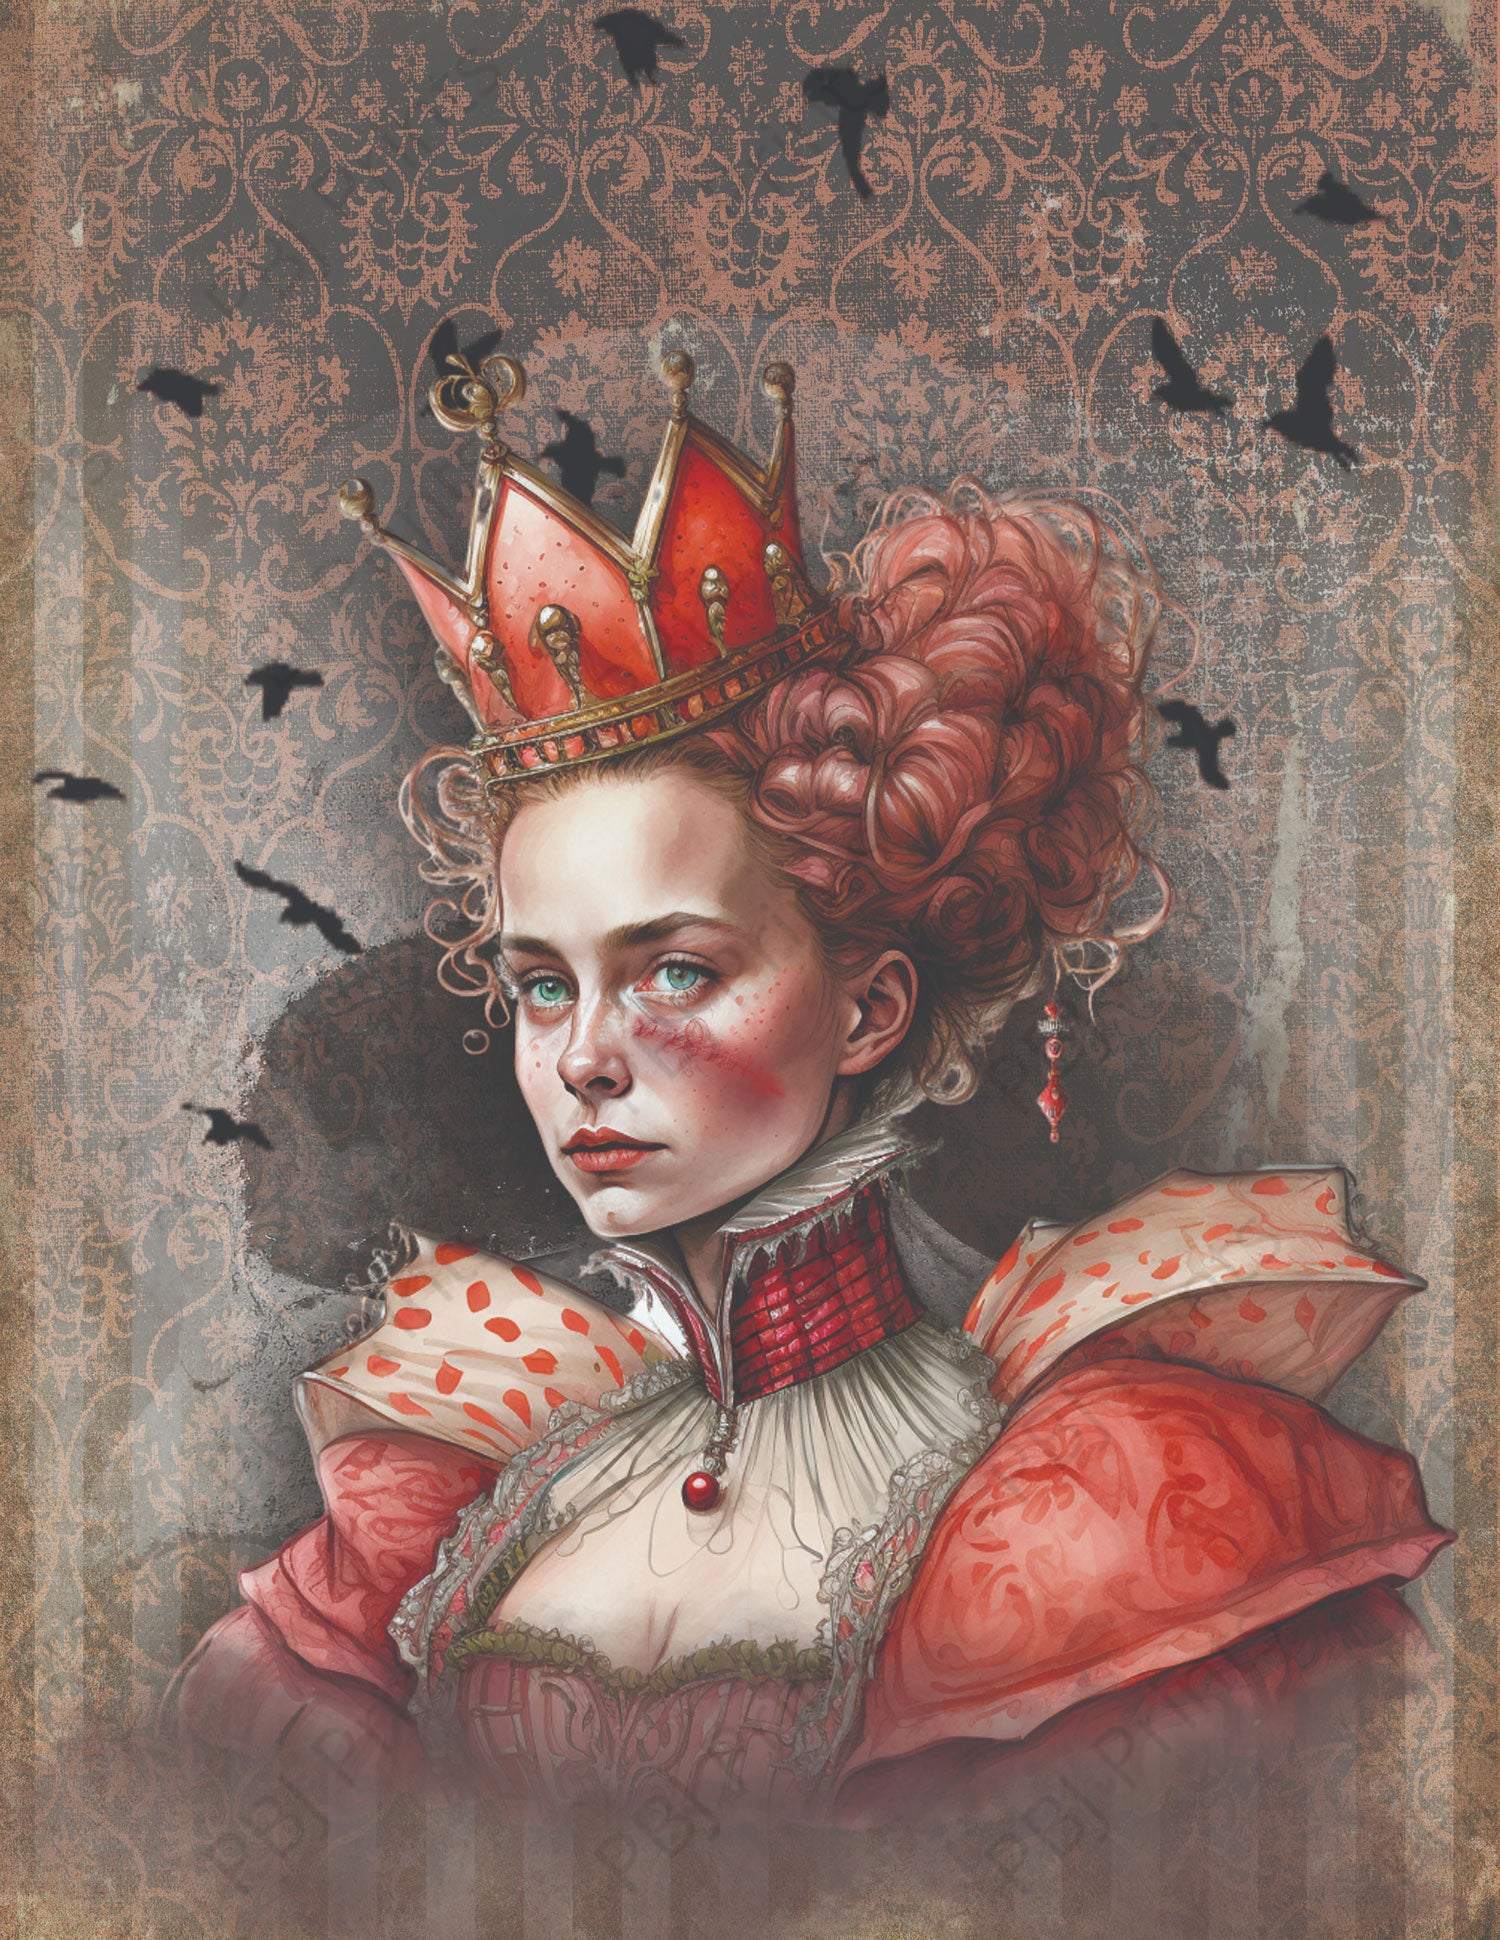 Red Queen - Artist by WeJo Arts - Art Prints, Decoupage Rice Paper, Flat Canvas Prints, Giclee Prints, Photo Prints, Poster Prints